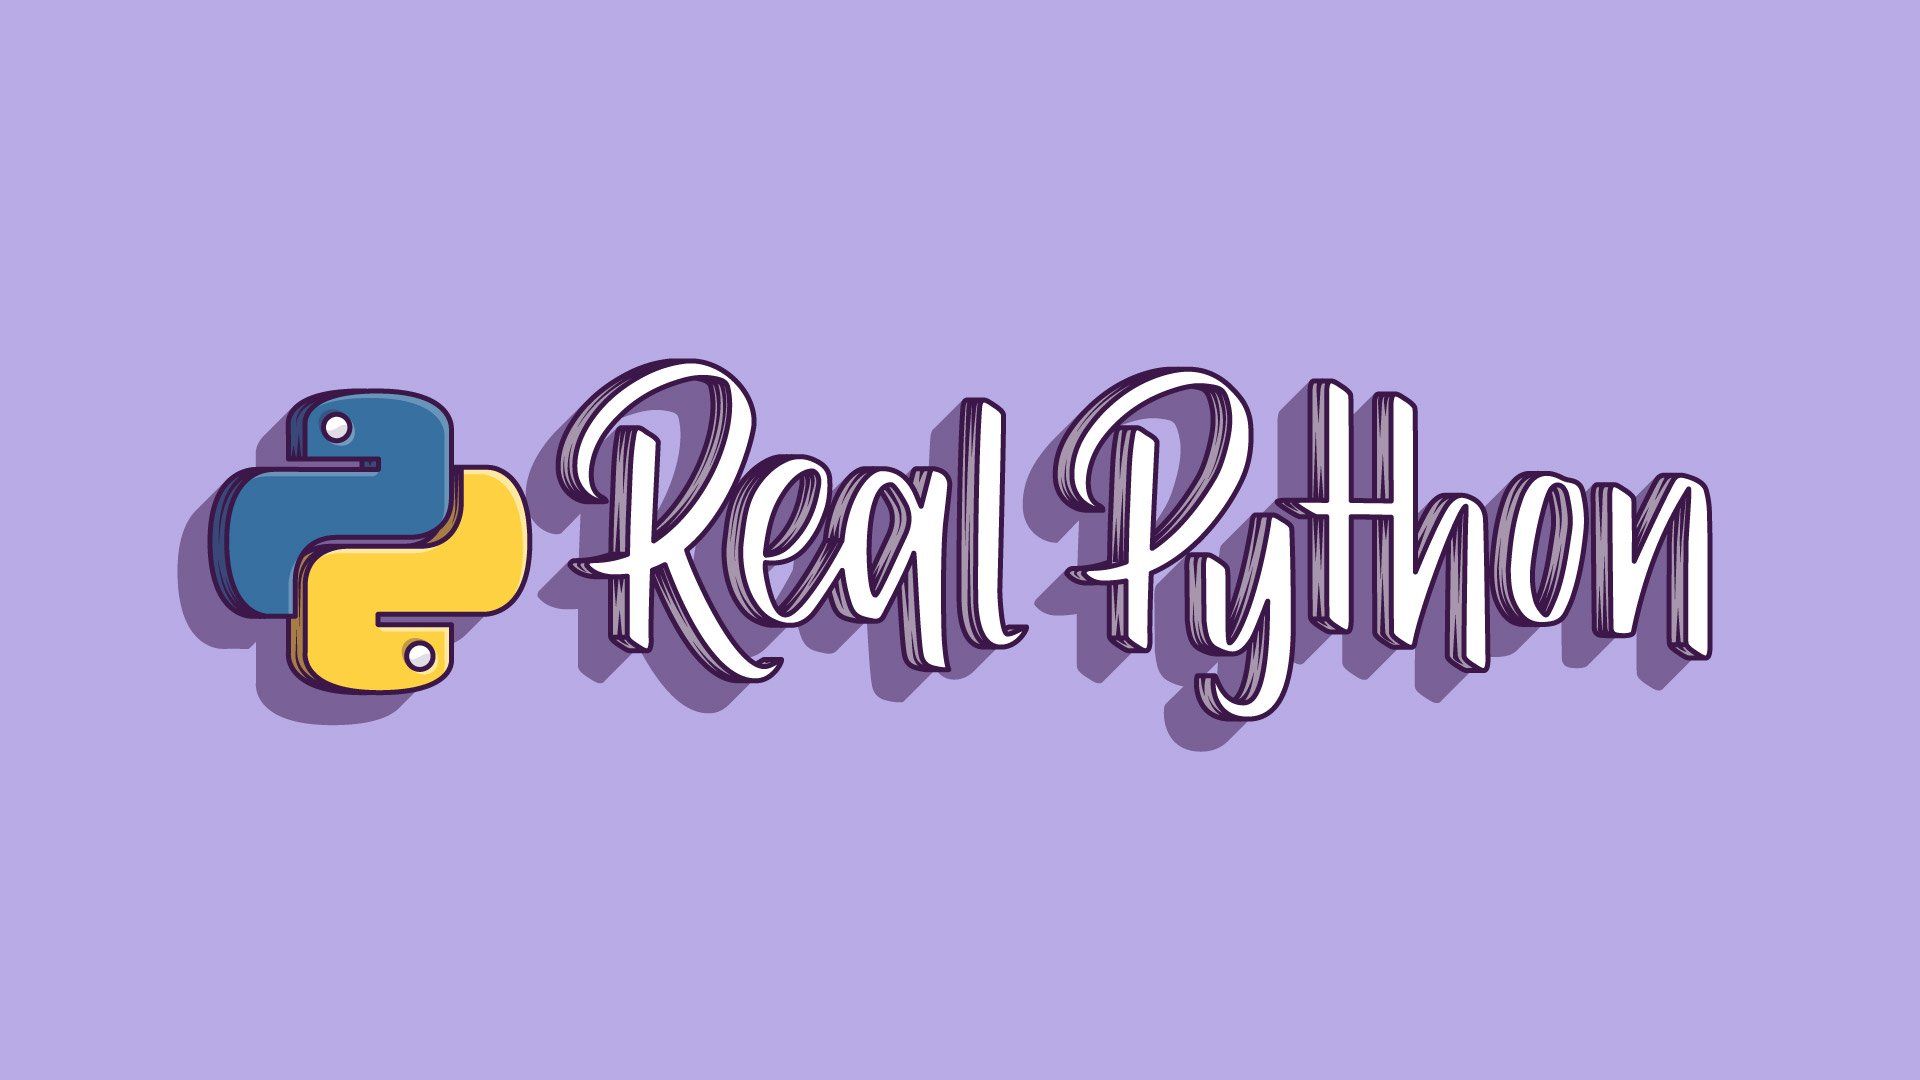 1920x1080 Getting Started With Bootstrap 3 8211 Real Python